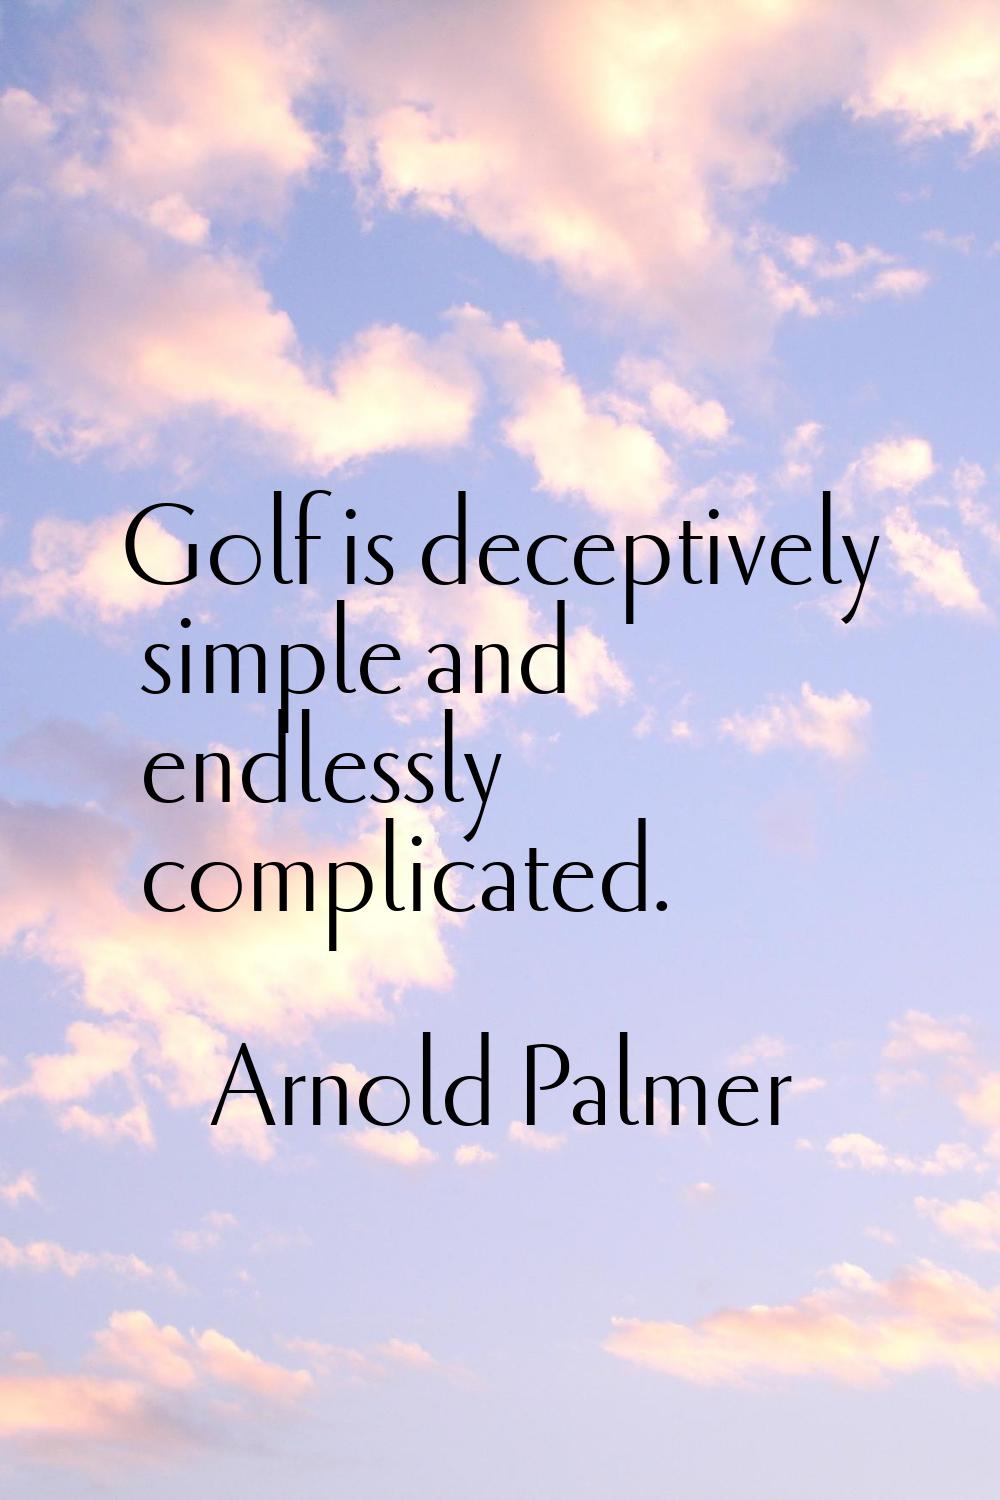 Golf is deceptively simple and endlessly complicated.